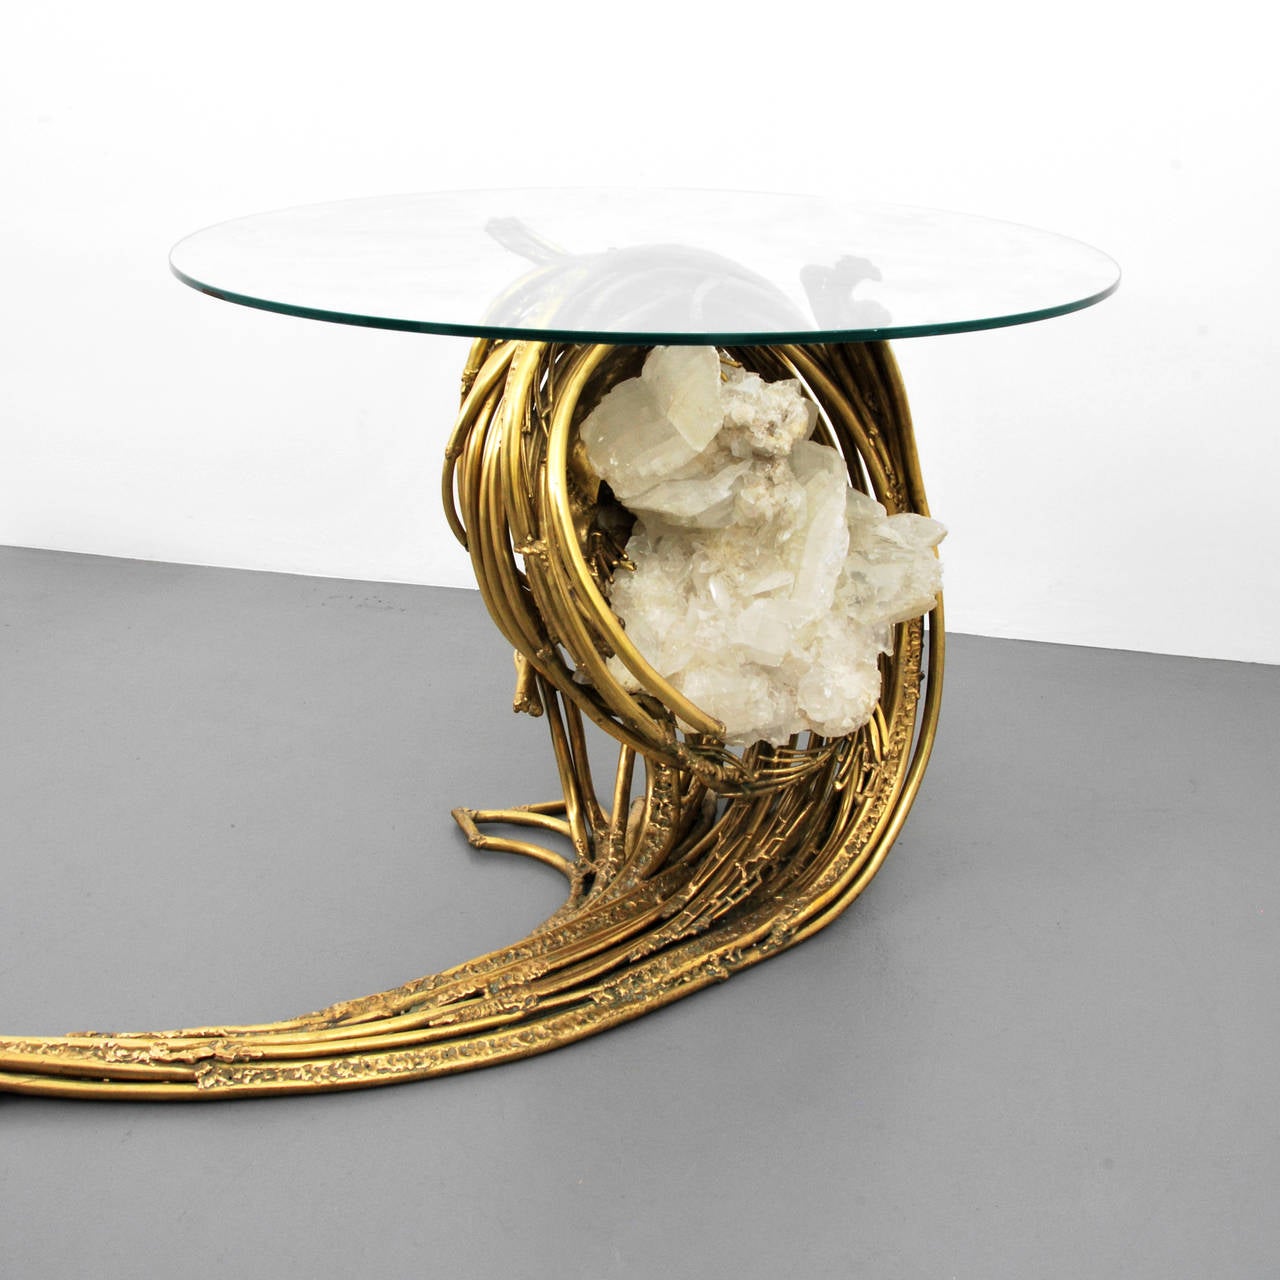 Modern Jacques Duval-Brasseur Sculptural Table and Stool